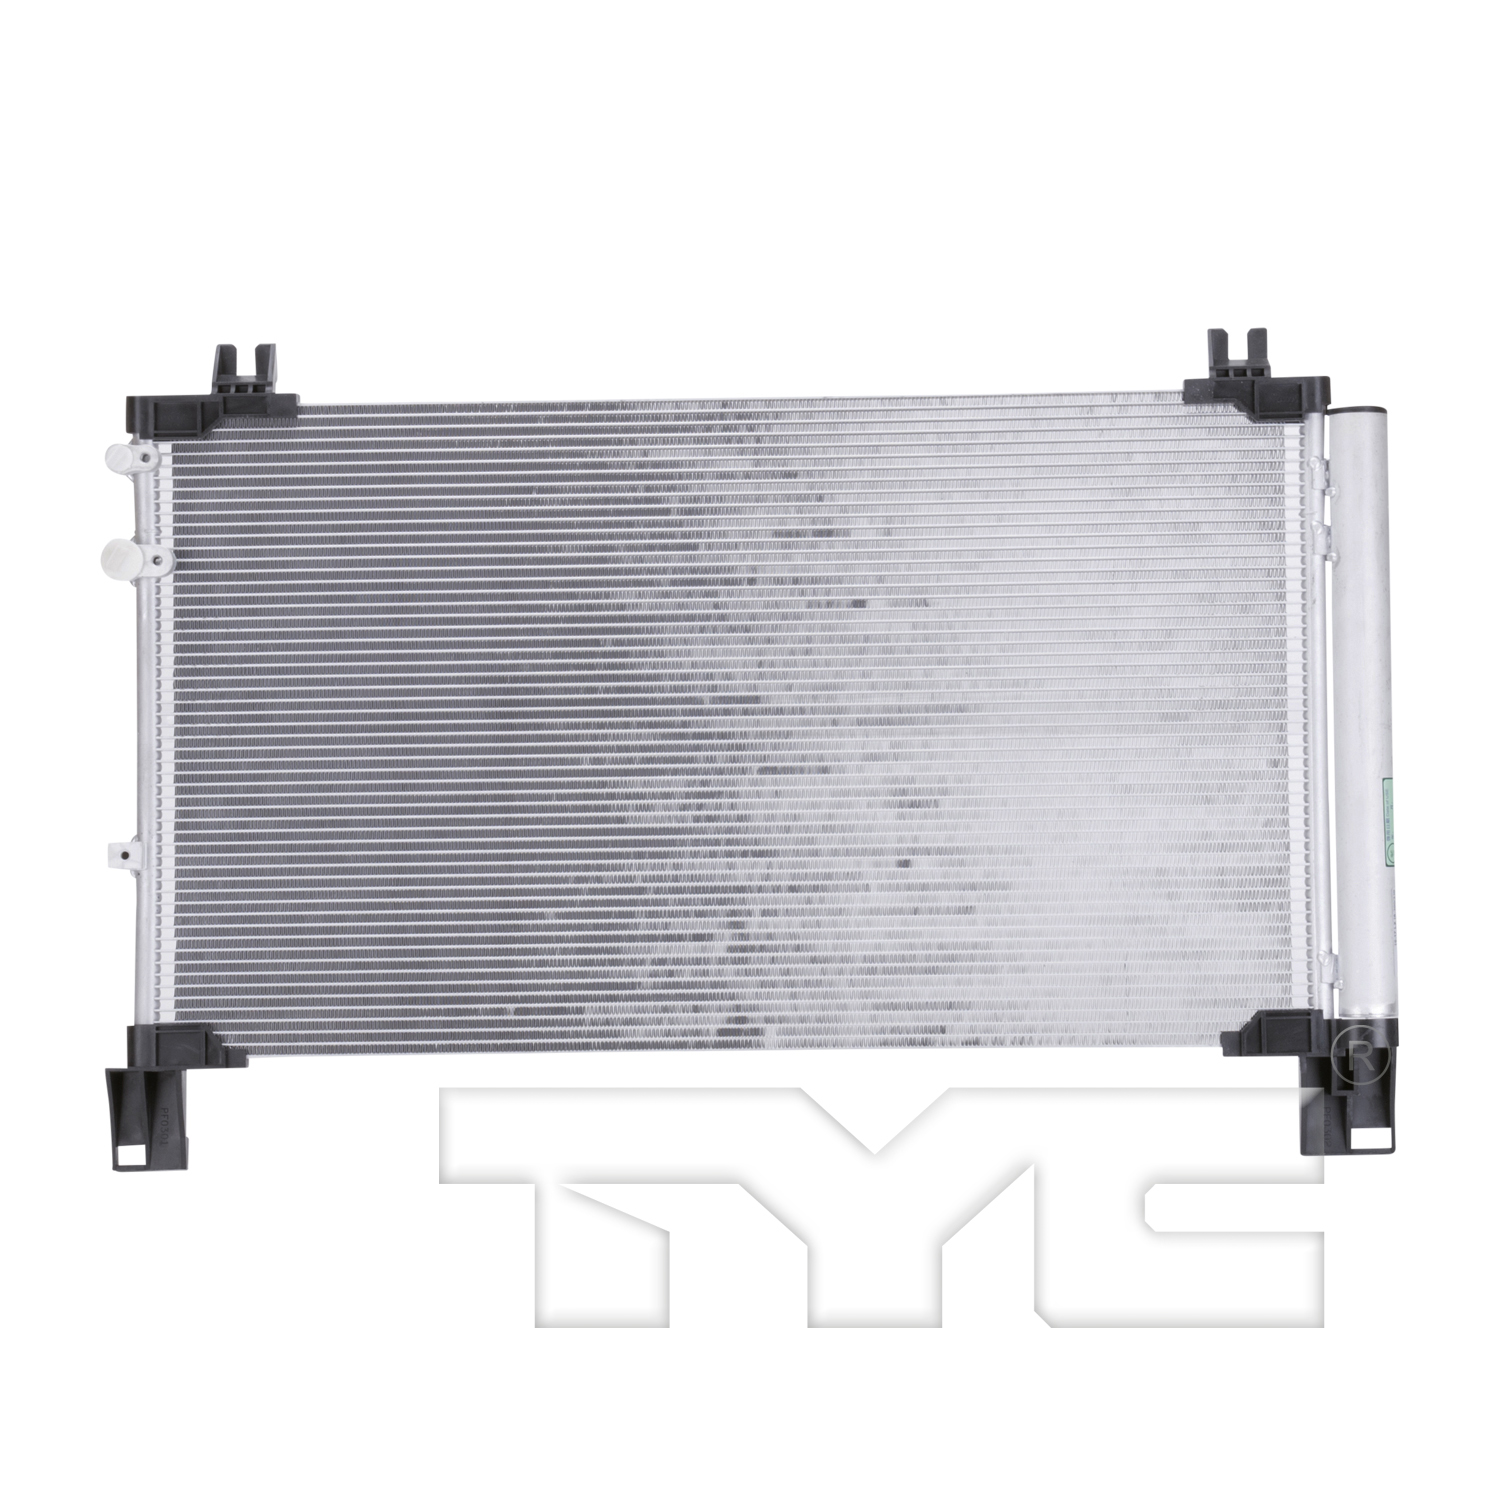 Aftermarket AC CONDENSERS for LEXUS - IS300, IS300,16-20,Air conditioning condenser